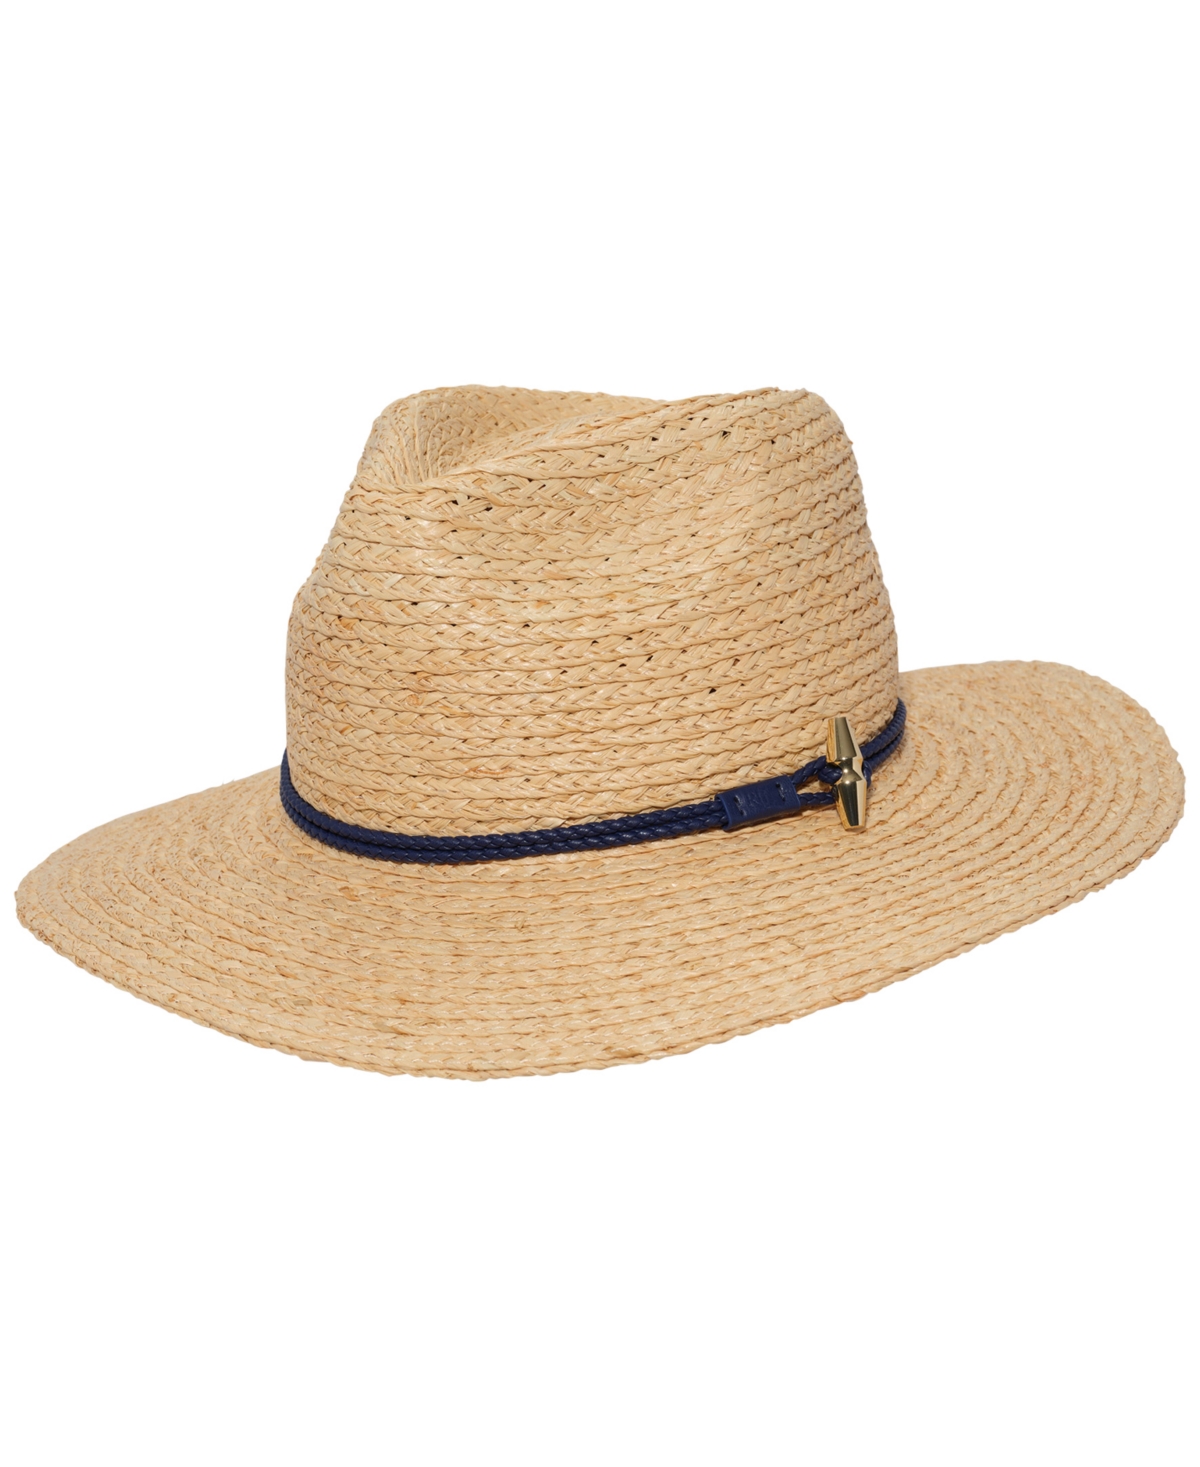 Raffia Fedora with Braided Band Hat - Natural